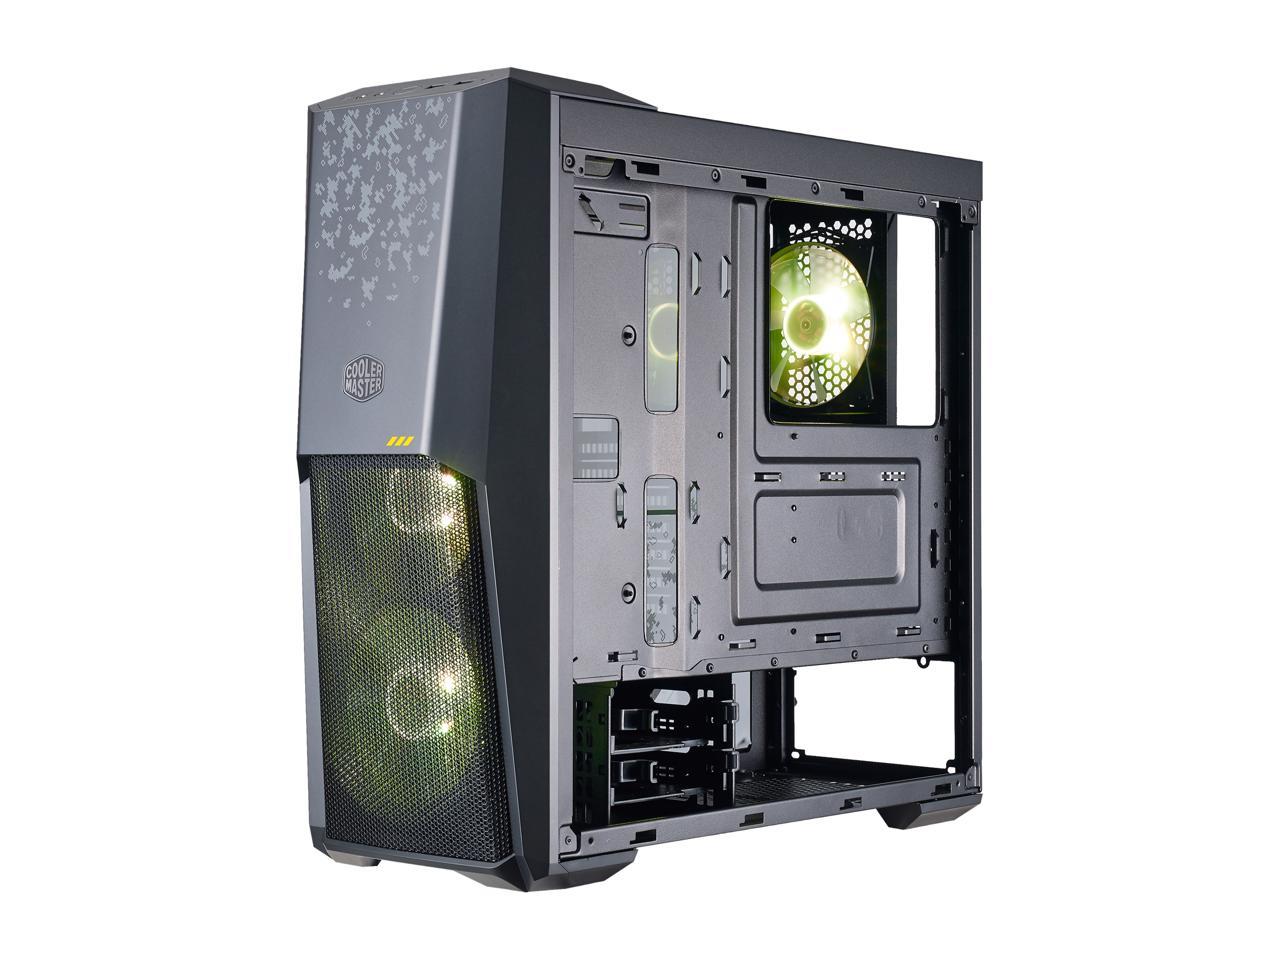 Cooler Master Masterbox Mb500 Tuf Gaming Alliance Edition Atx Mid Tower W Tuf Aesthetic Design Semi Meshed Front Ventilation Tempered Glass Side Panel 3 X 1mm Rgb Fans Newegg Com